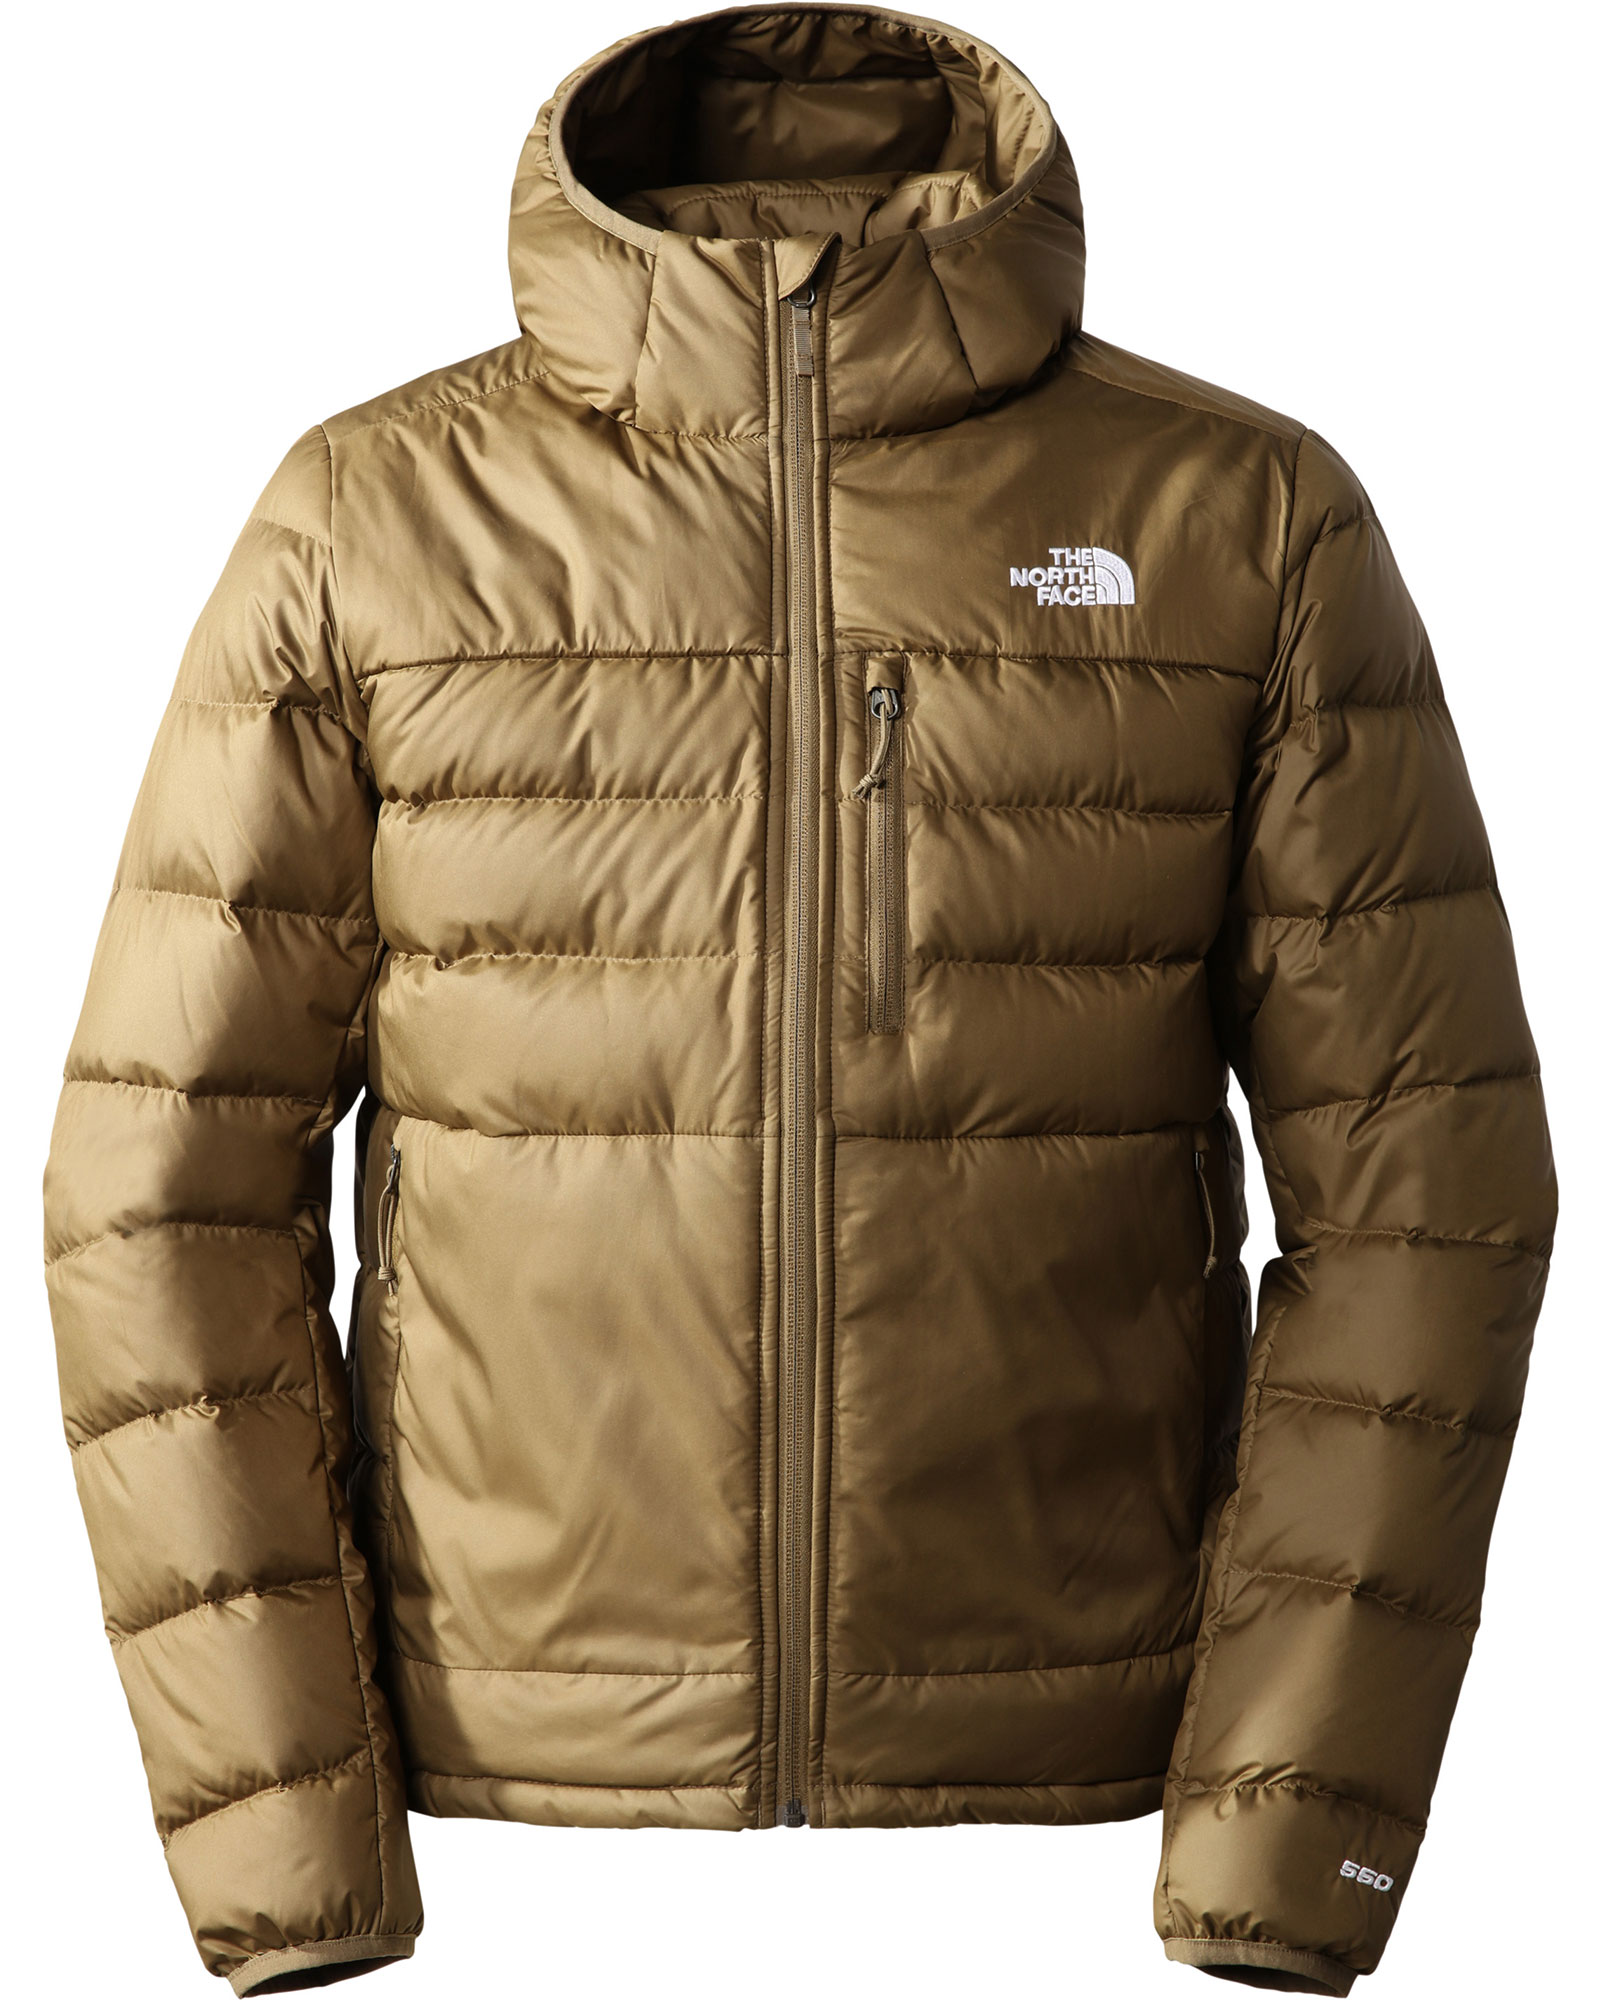 The North Face Aconcagua 2 Men’s Hoodie - Military Olive M